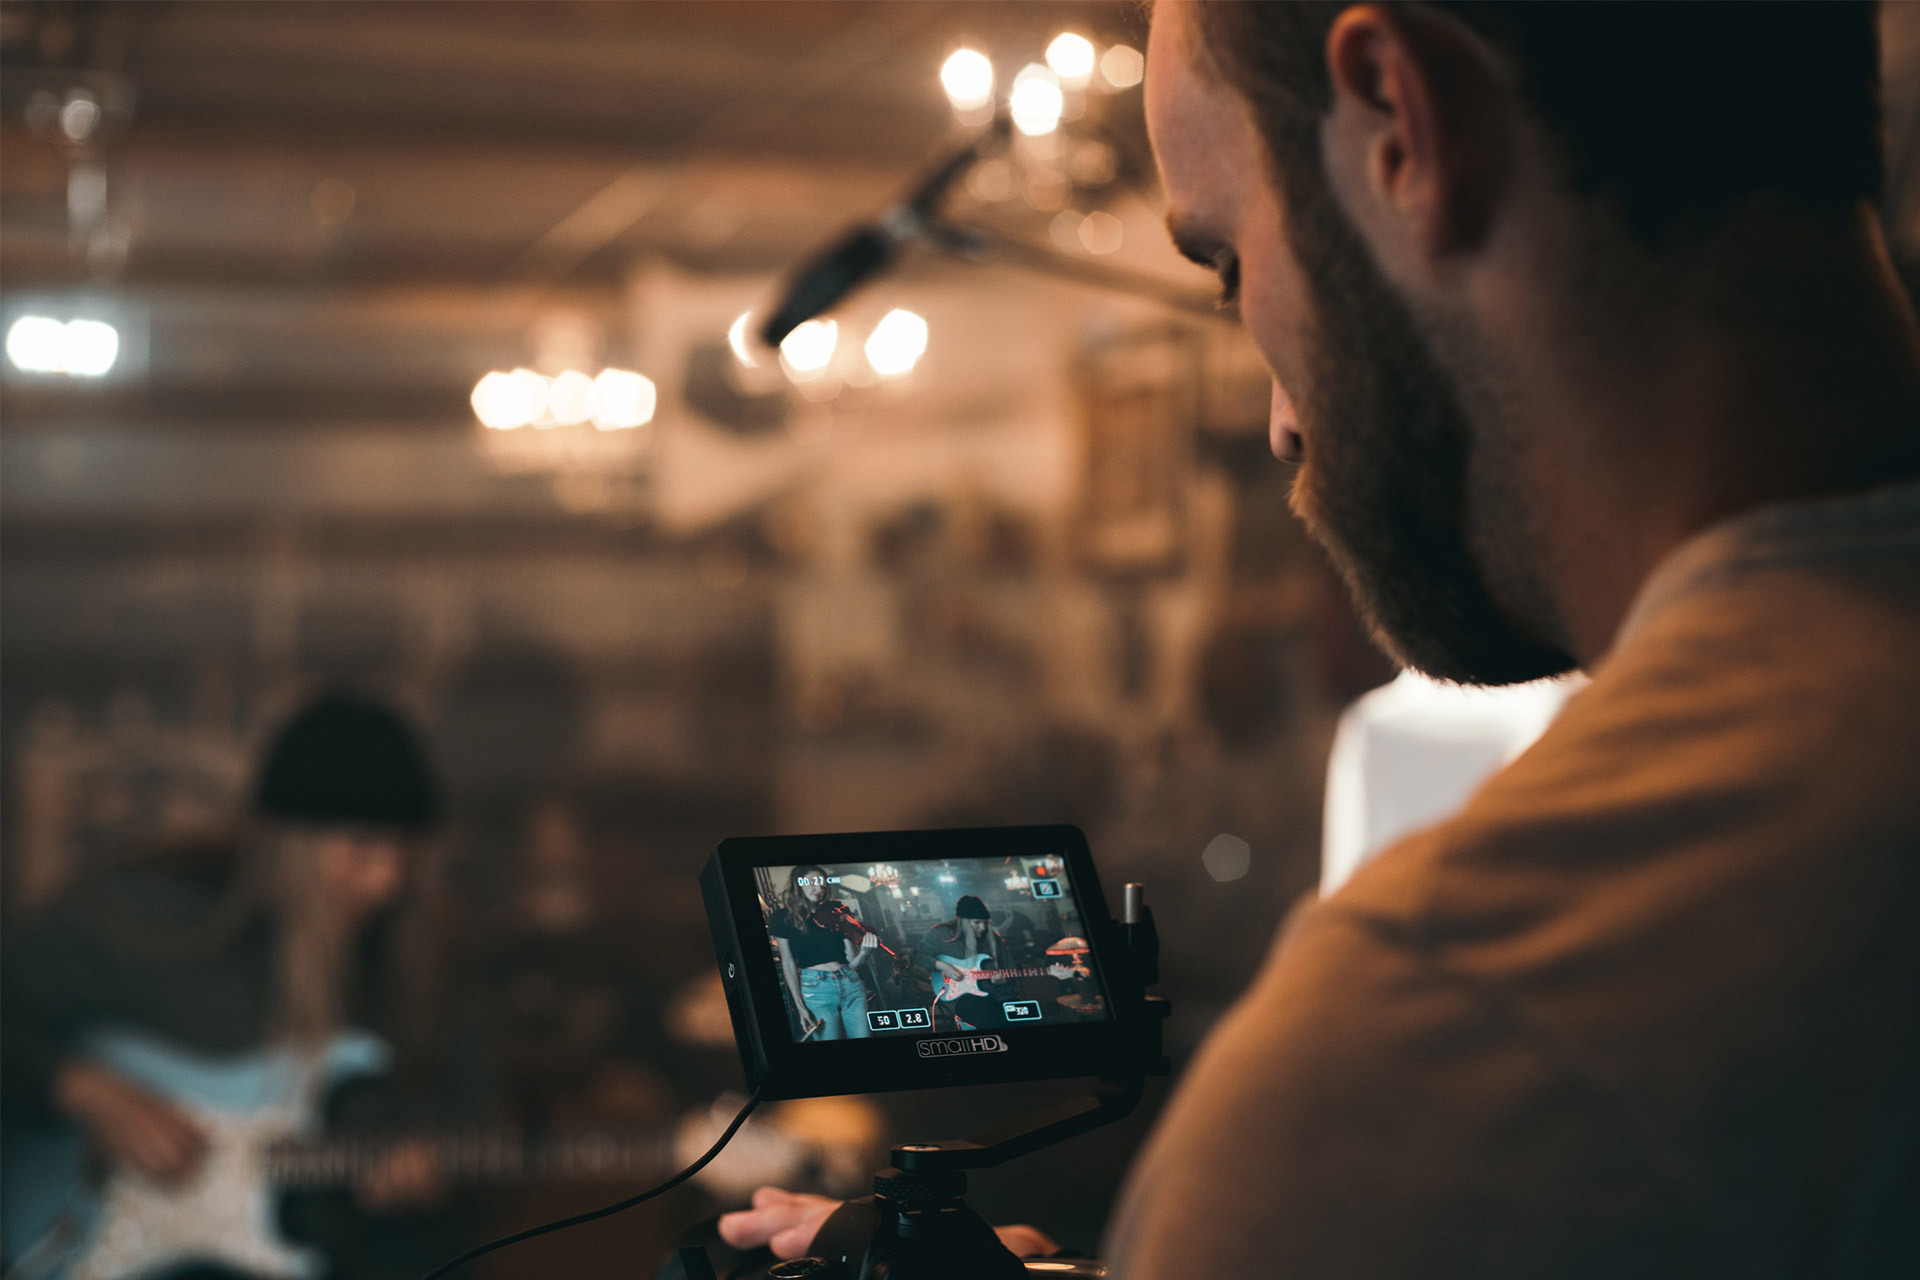 A film crew captures raw footage on a video shoot